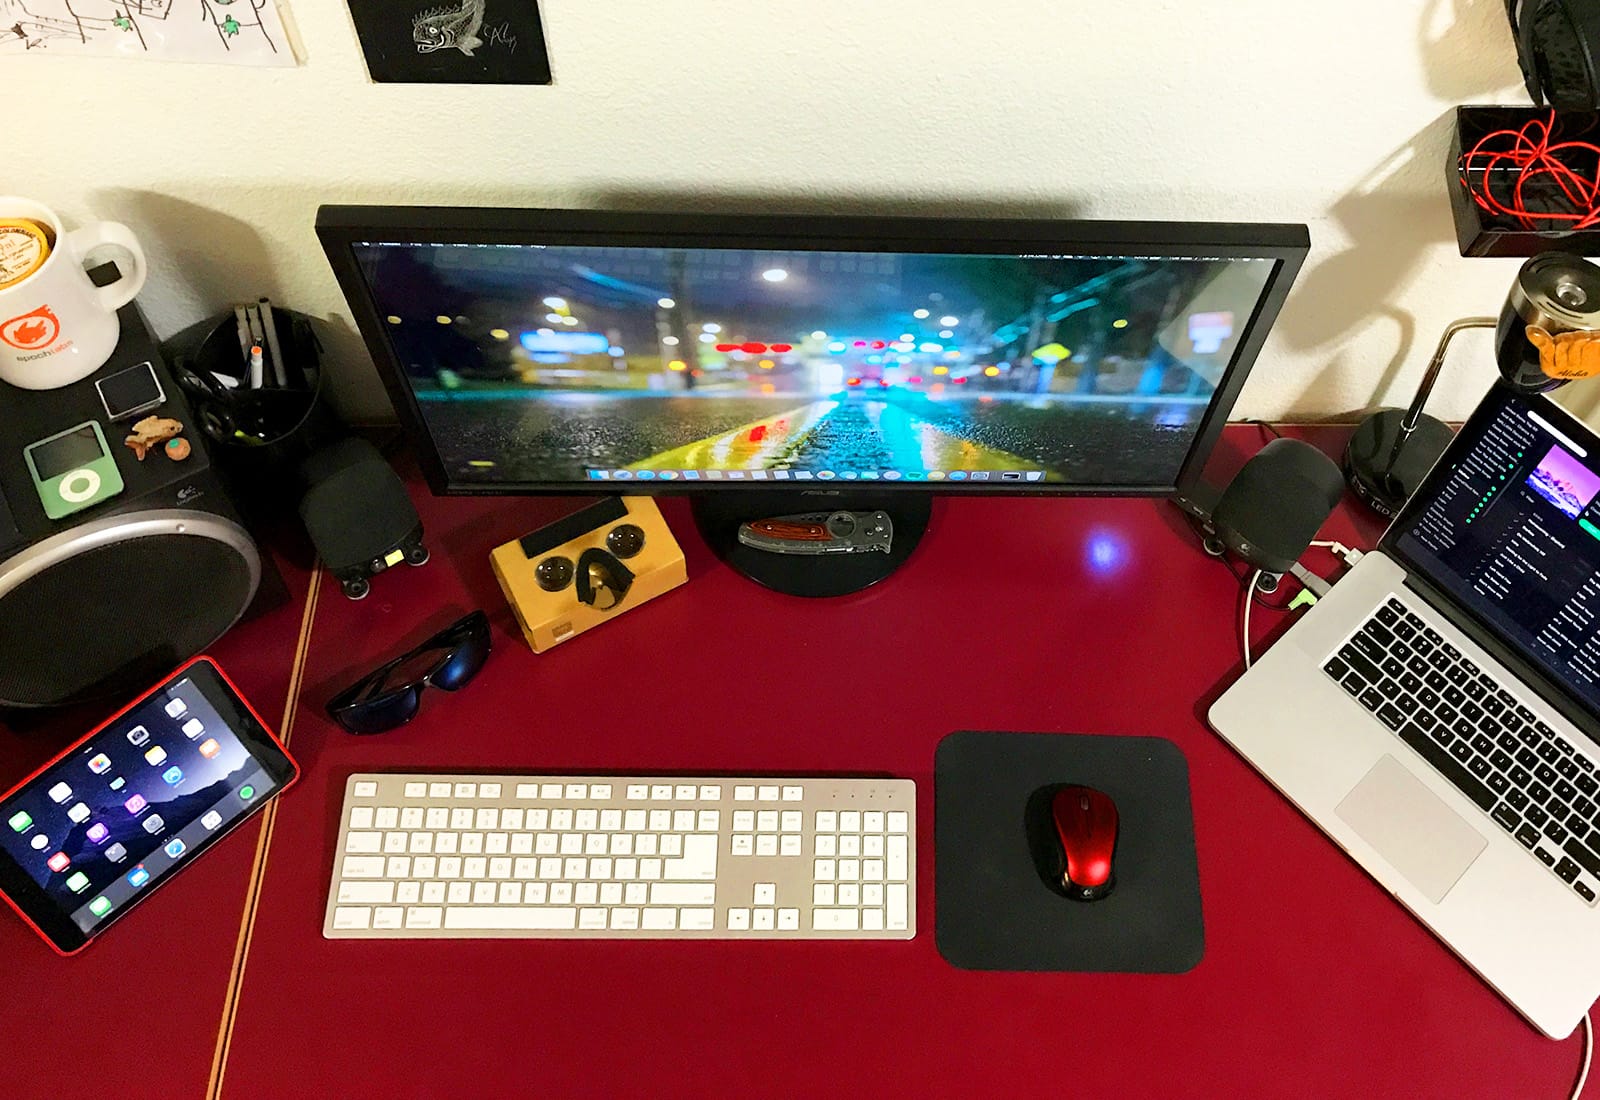 Red is definitely the color of the day in Episode 2 of iSetups, our weekly showcase of readers' Apple setups.